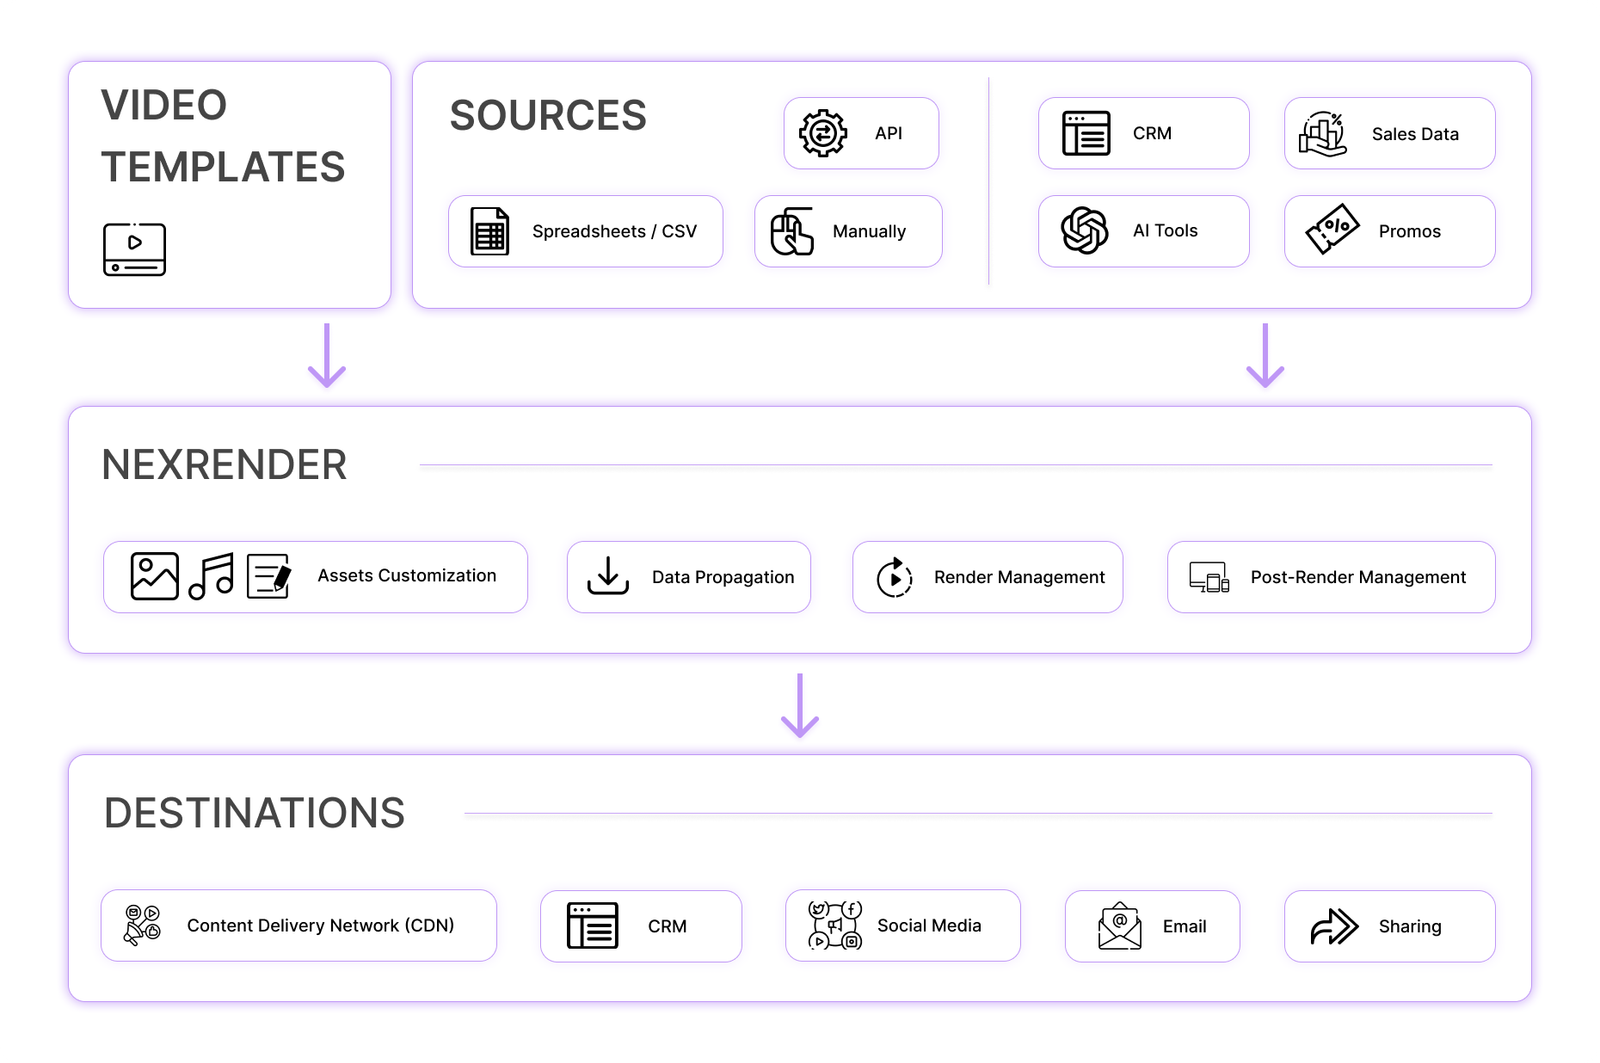 Integrations: sources and destinations in Nexrender. Video templates and sources like API, Spreadsheets, CRM, AI tools, Sales